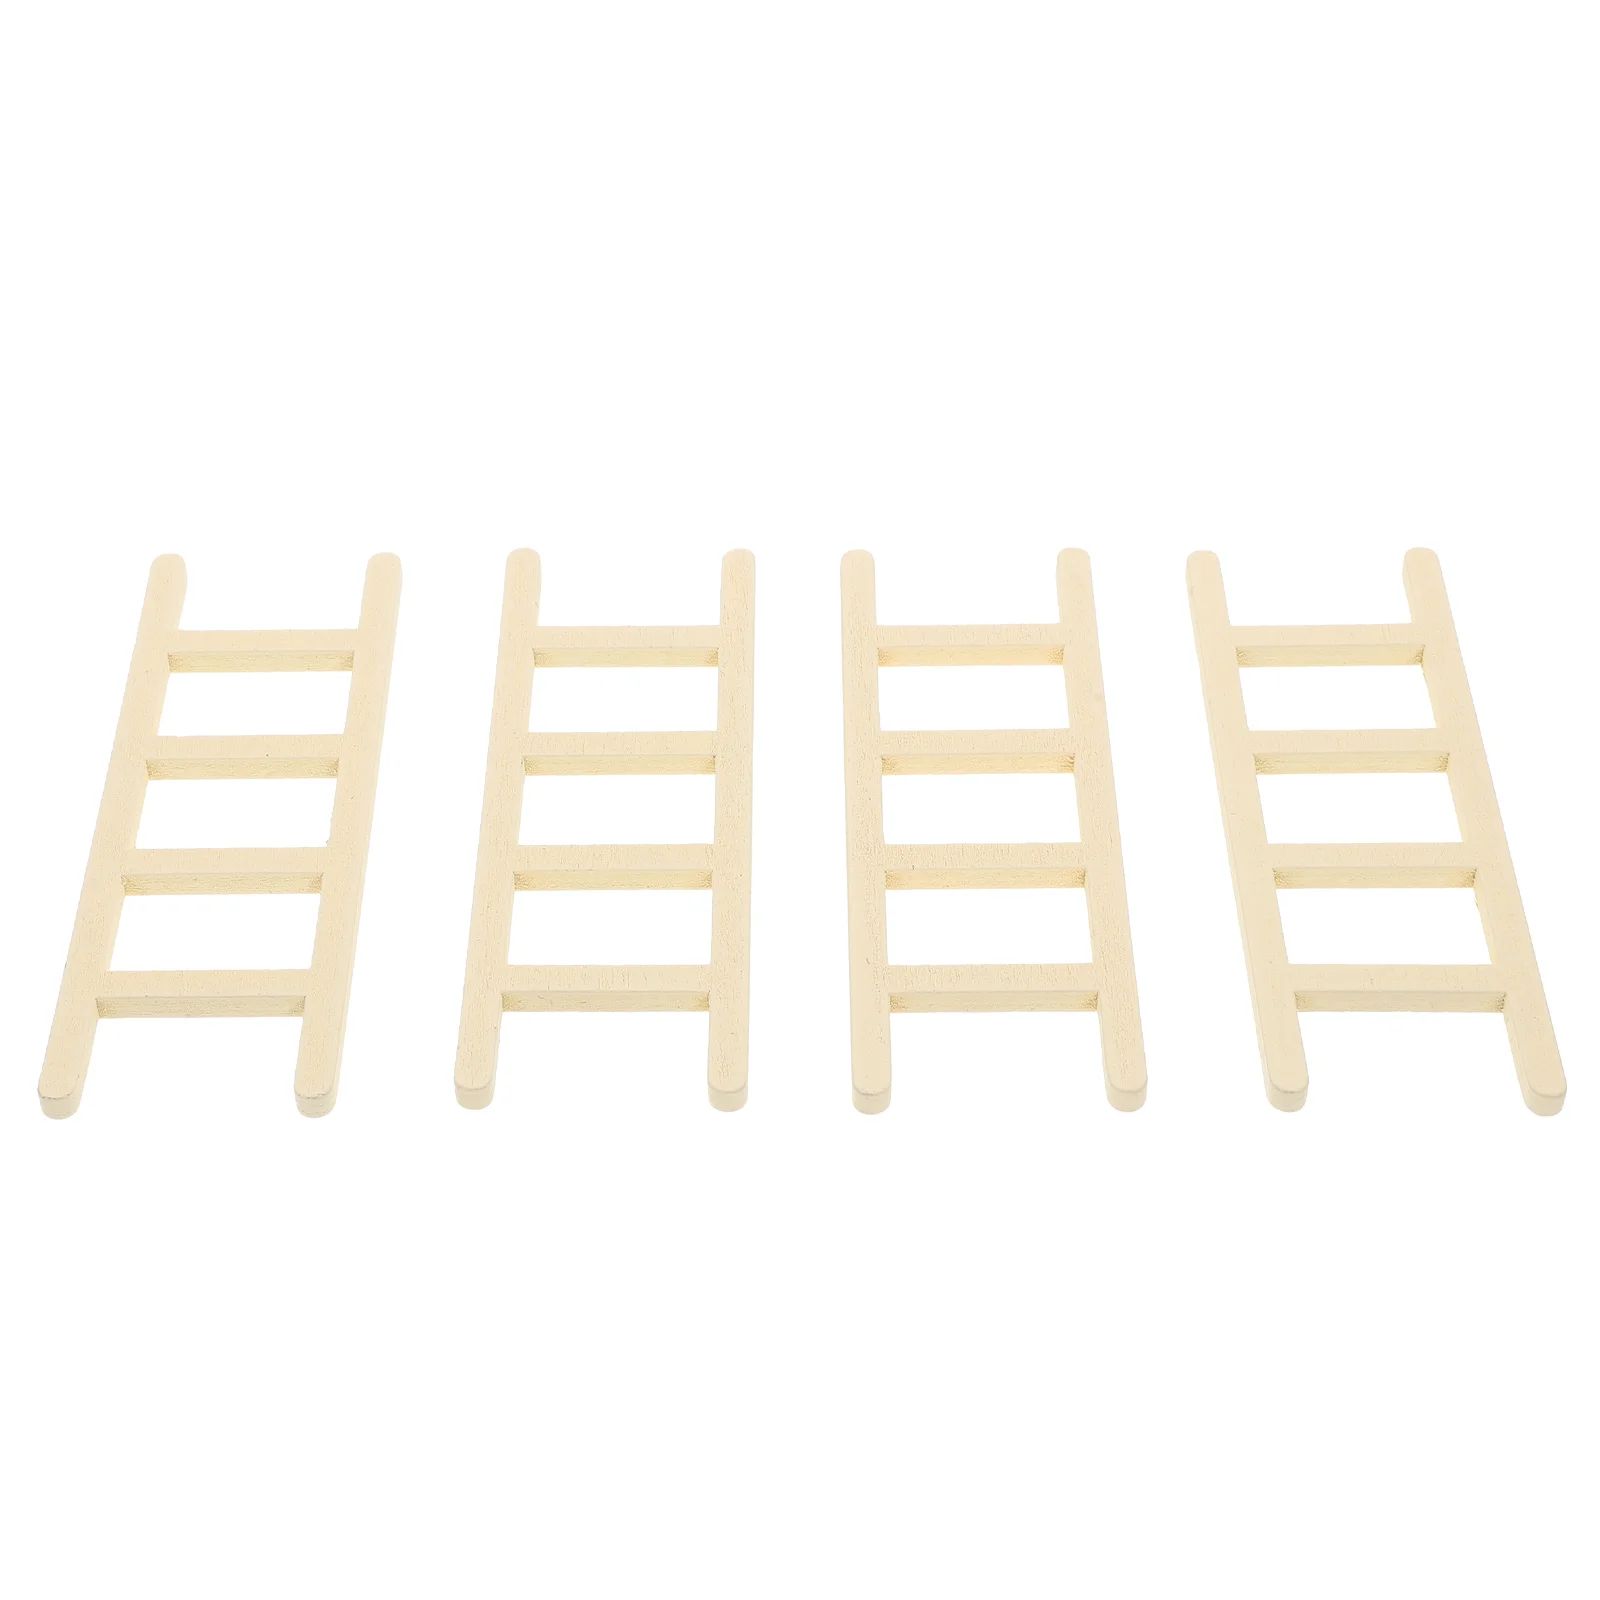 

Ladder Mini Decorhousesupplies Tree Palm Accessorieswooden Small Furniture Tiny Miniature Stairs